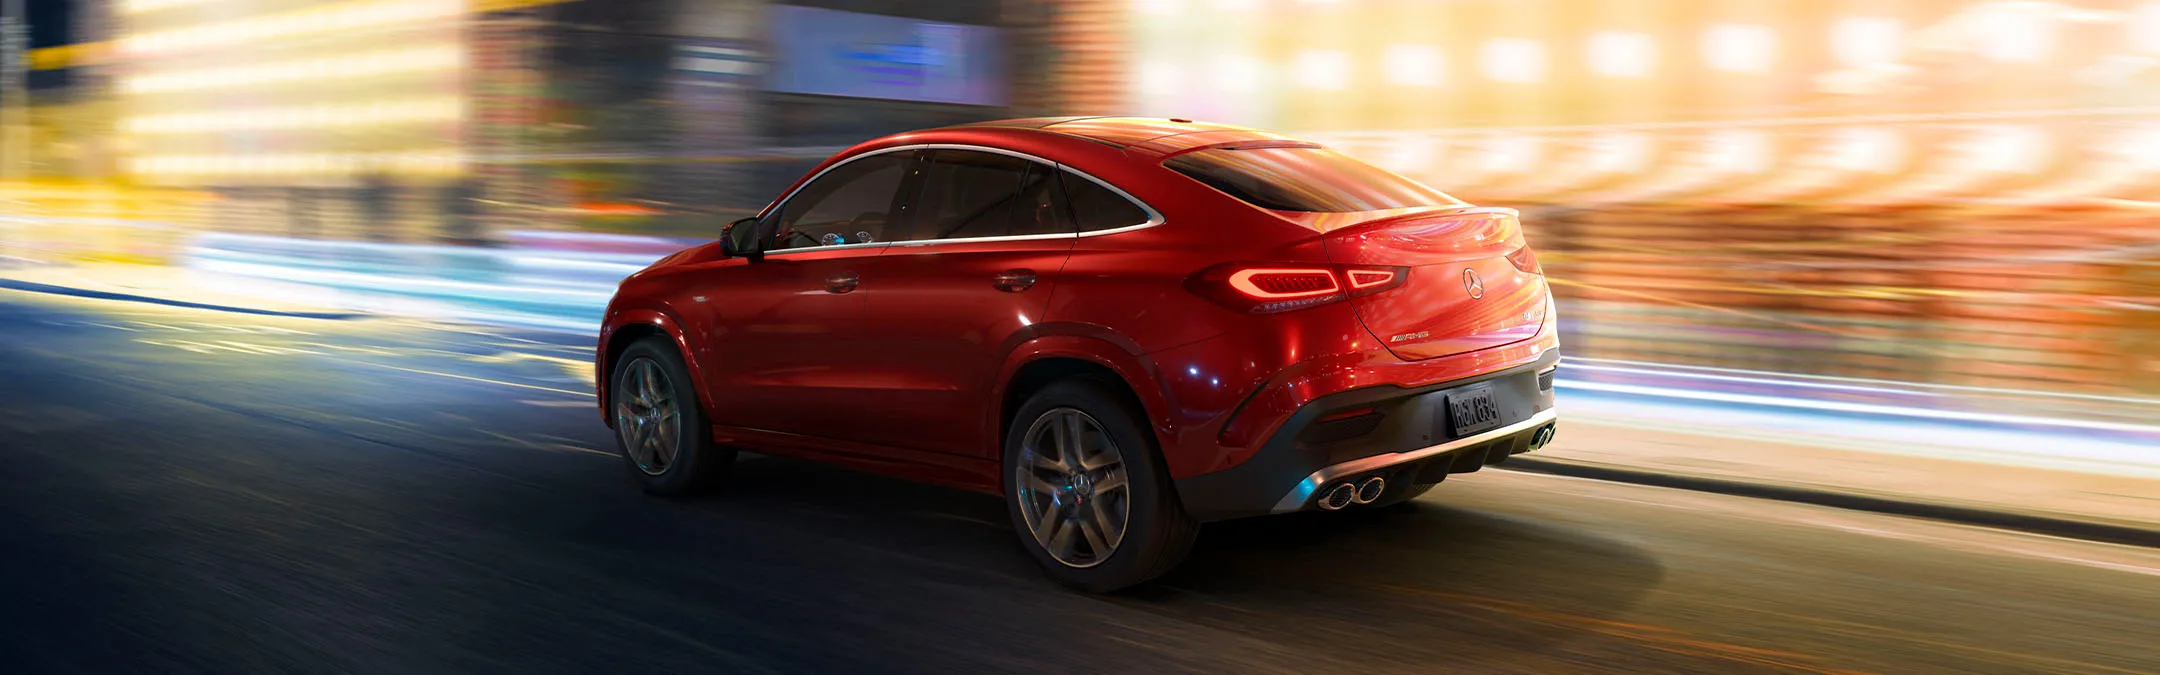 MBCAN-2023-AMG-GLE-COUPE-CH-1-1-DR